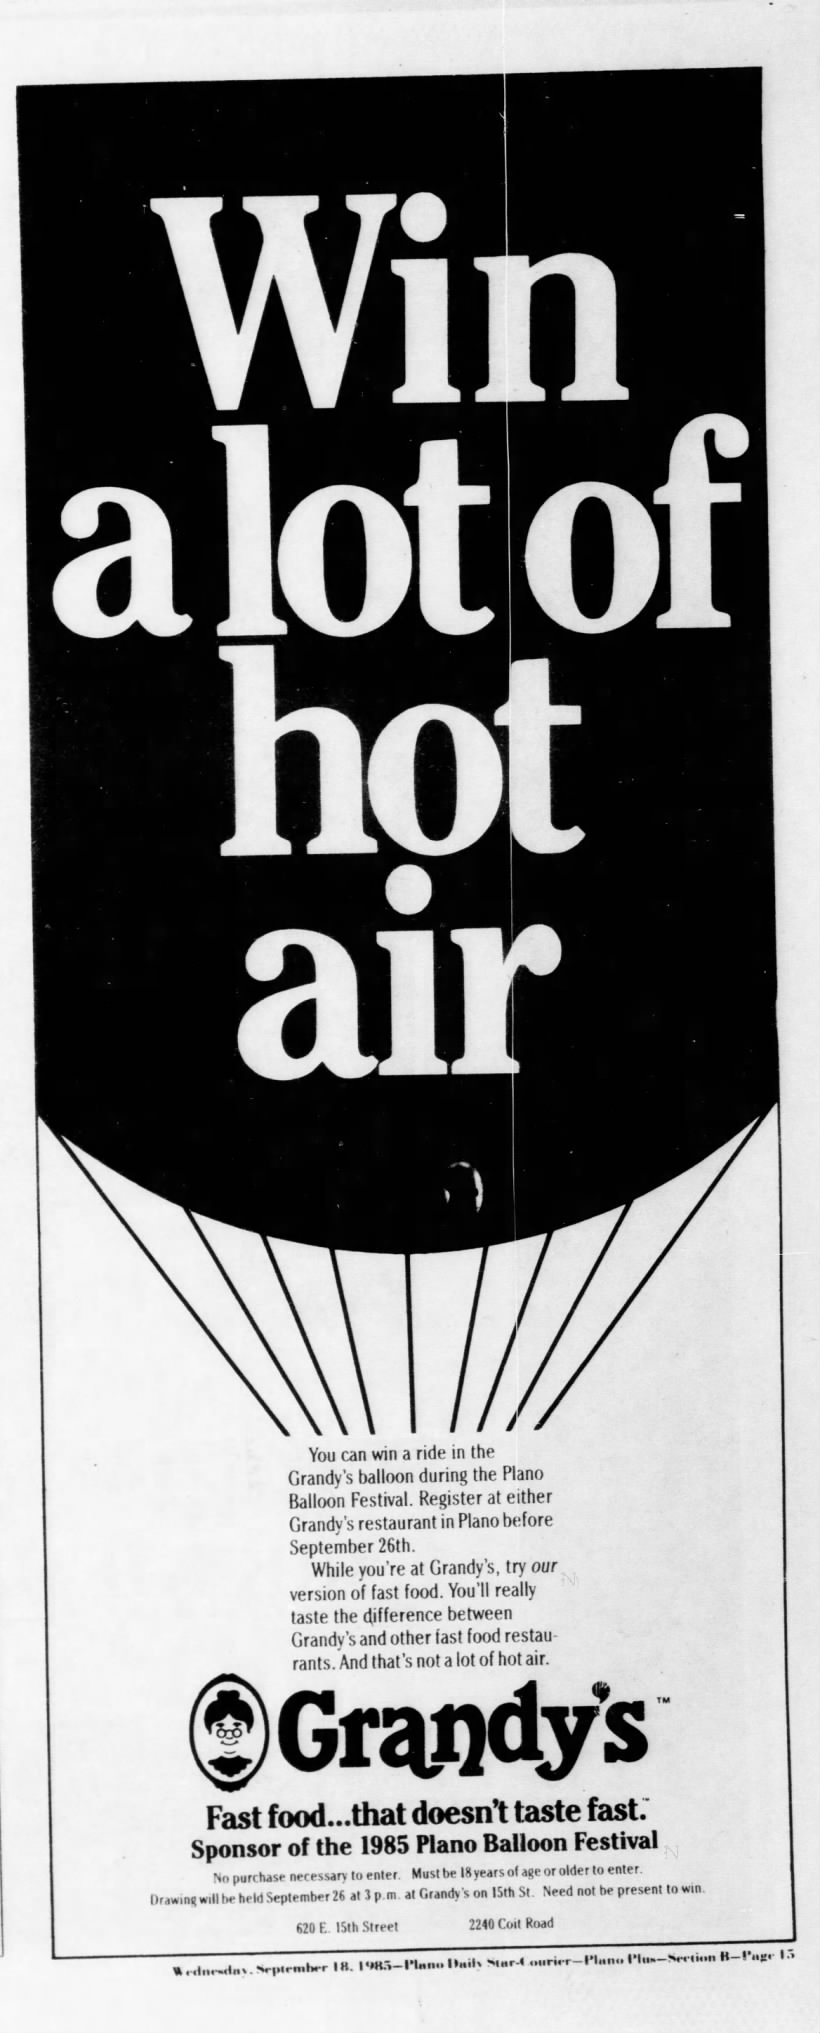 Win a lot of hot air. Grandy's. Sponsor of the 1985 Plano Balloon Festival.